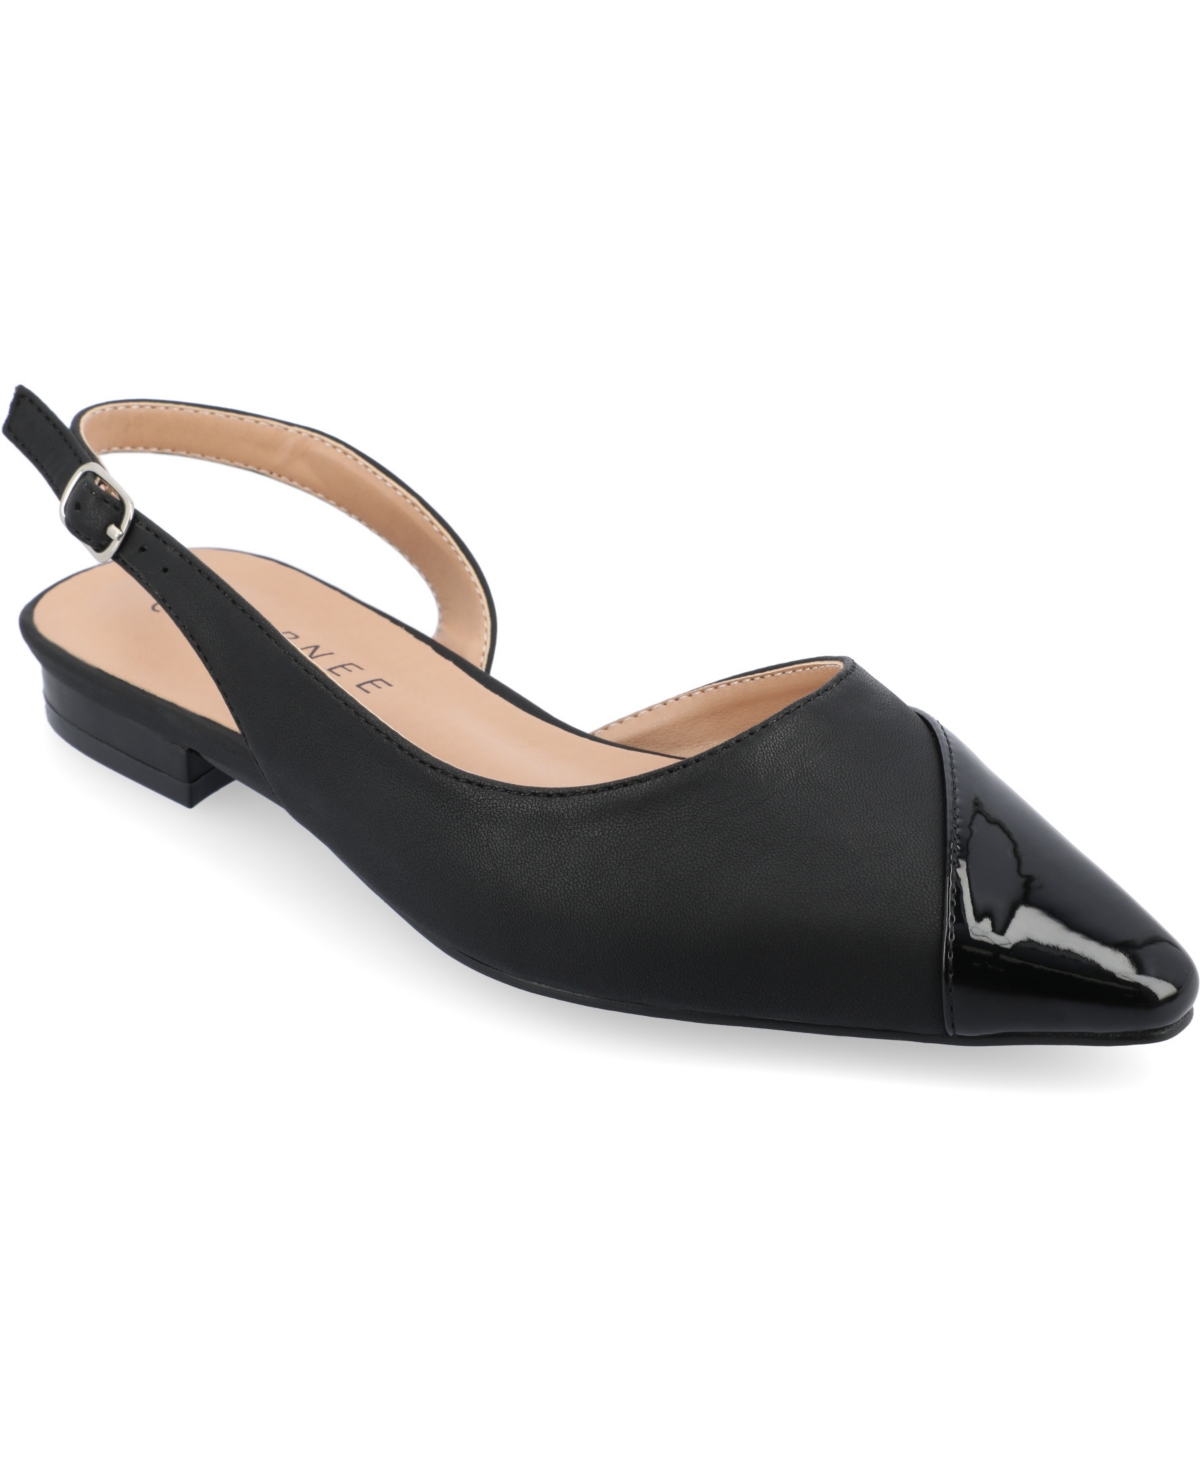 Women's Daphnne Slingback Pointed Toe Flats - Taupe